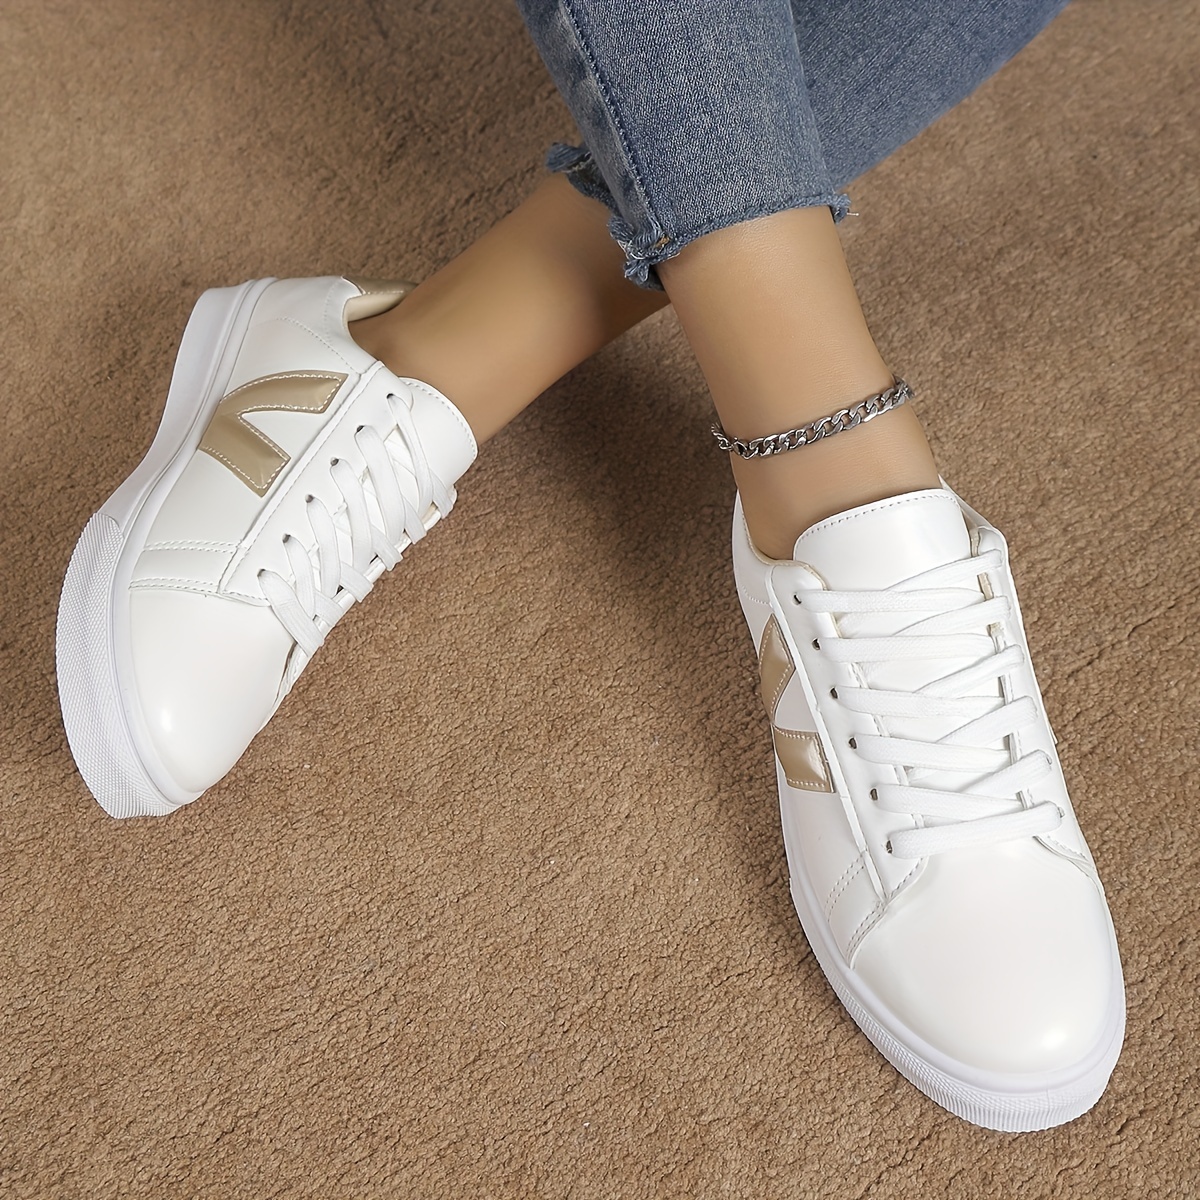 Women's Comfortable Trainers Sneakers, Newshoes